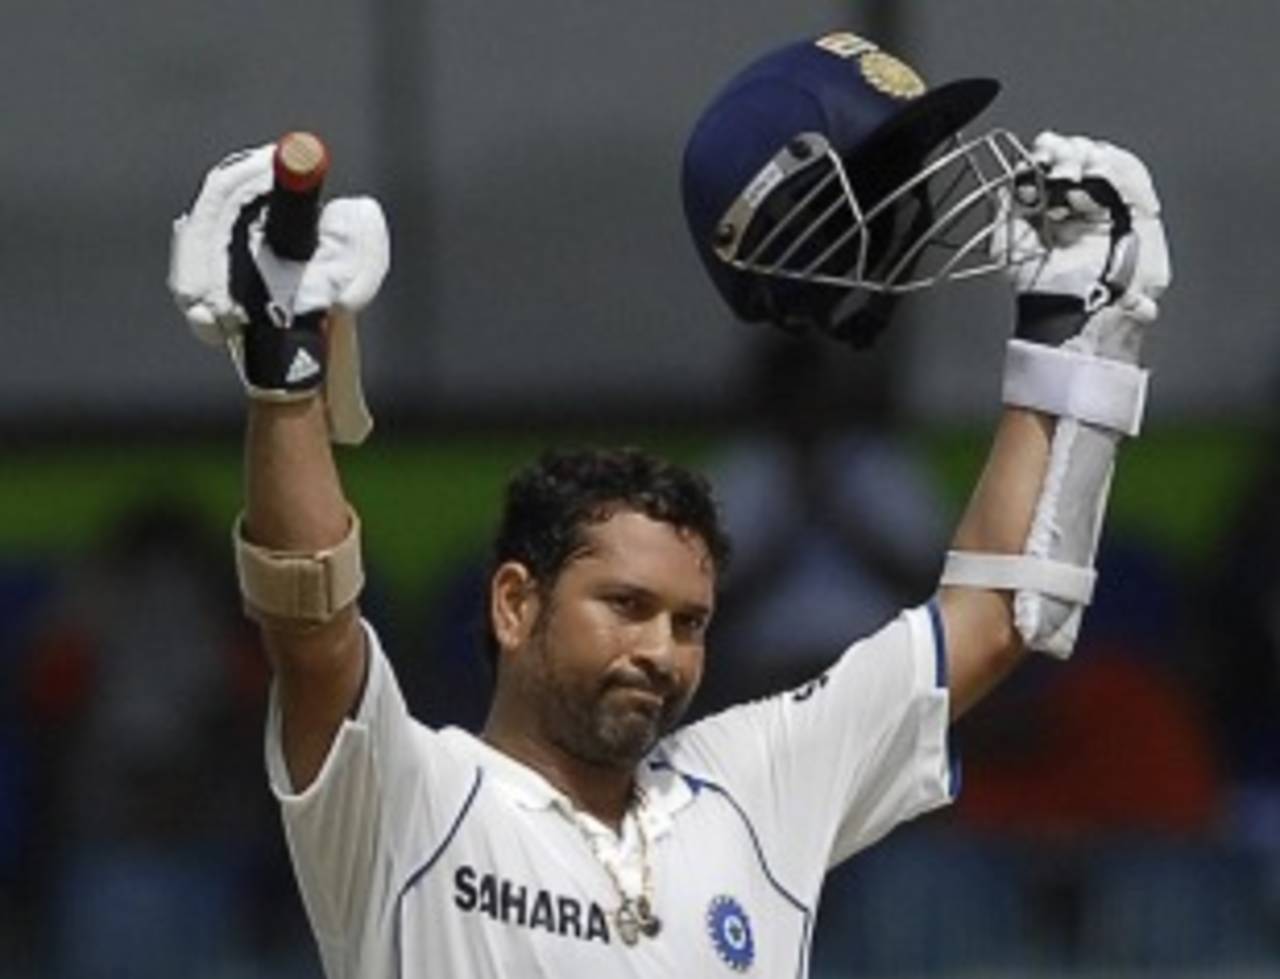 Sachin Tendulkar reached his fifth double-century in Tests, Sri Lanka v India, 2nd Test, SSC, 4th day, July 29, 2010